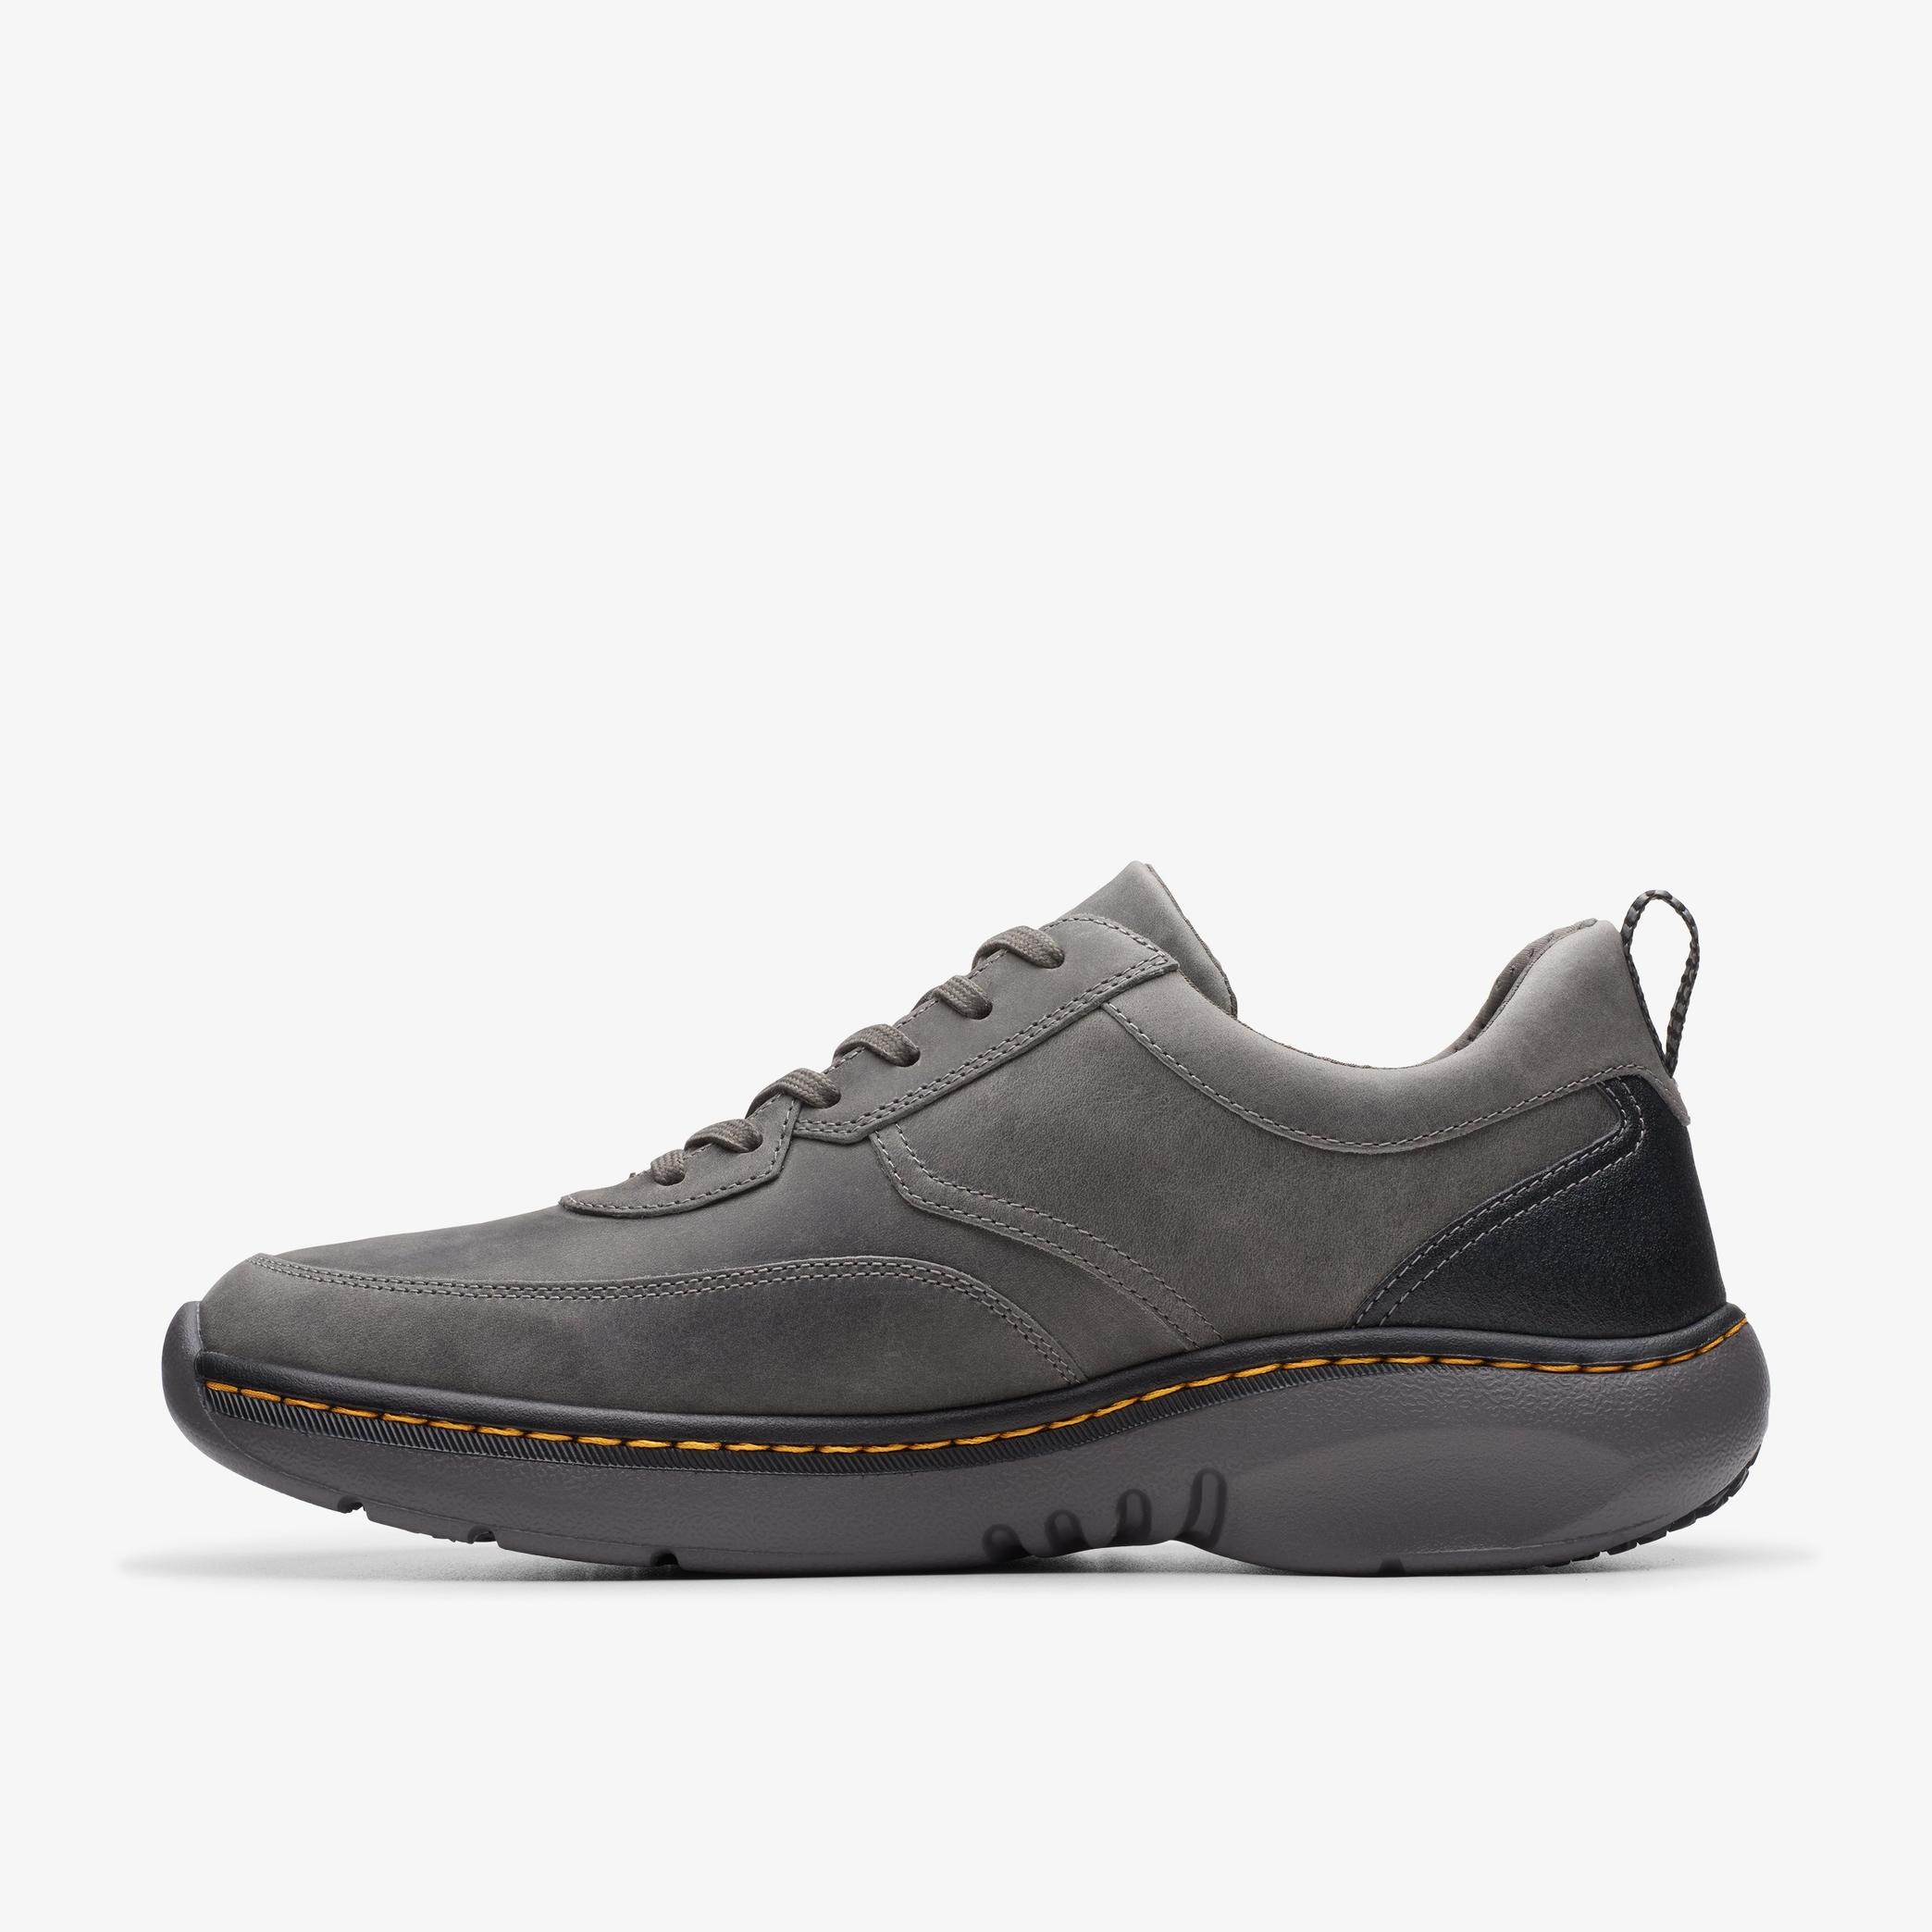 MENS Clarks Pro Lace Dark Grey Leather Trainers | Clarks Outlet